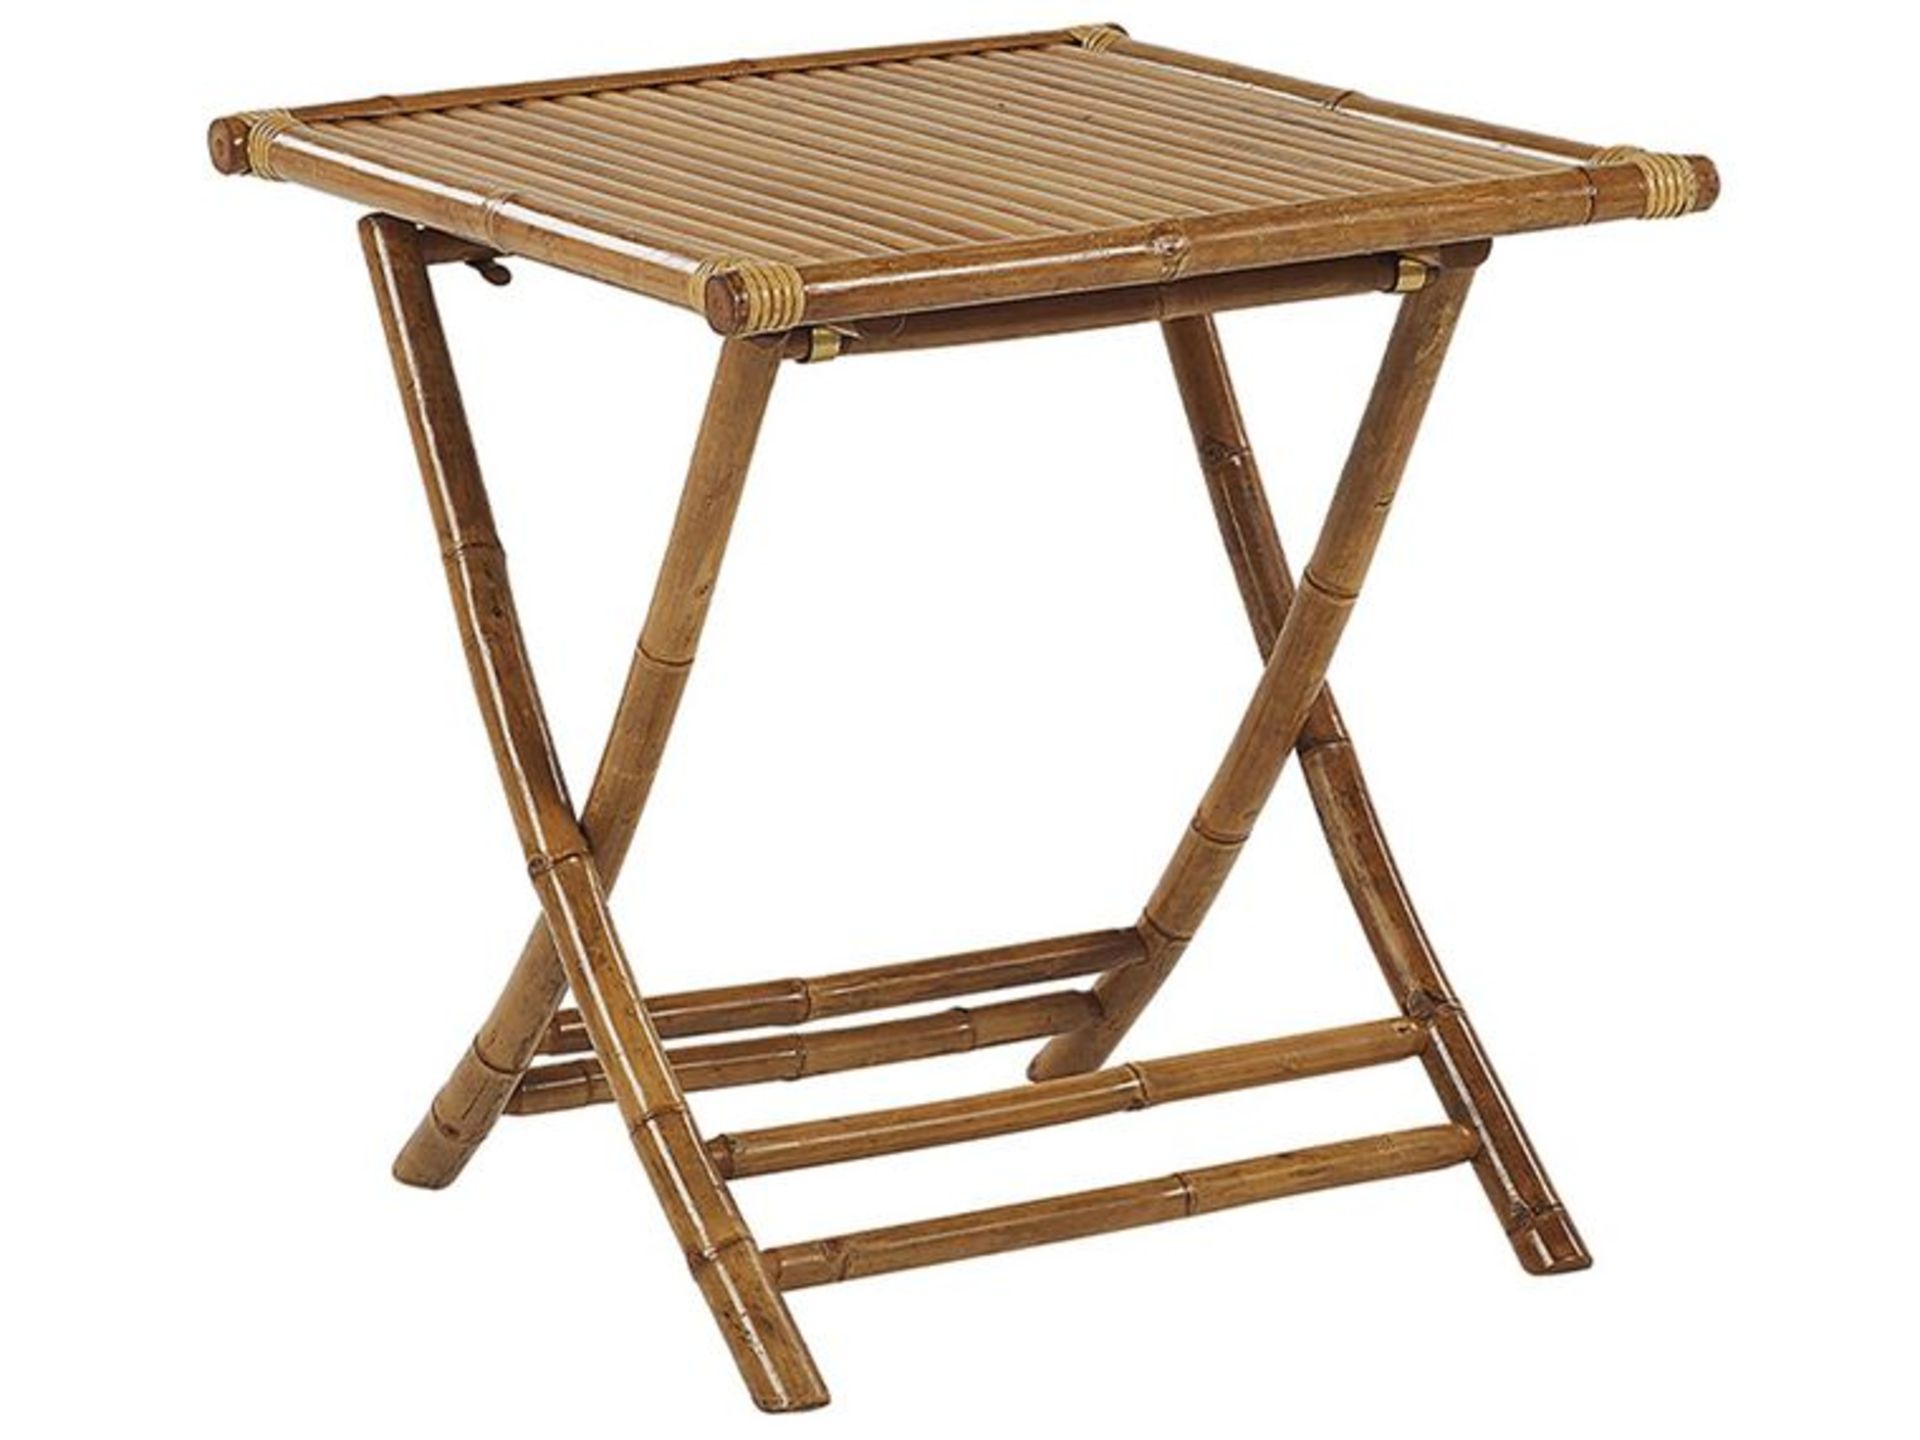 Molise Bamboo Bistro Table 70 x 70 cm Light Wood.- SR6. RRP £129.99. This wooden coffee table will